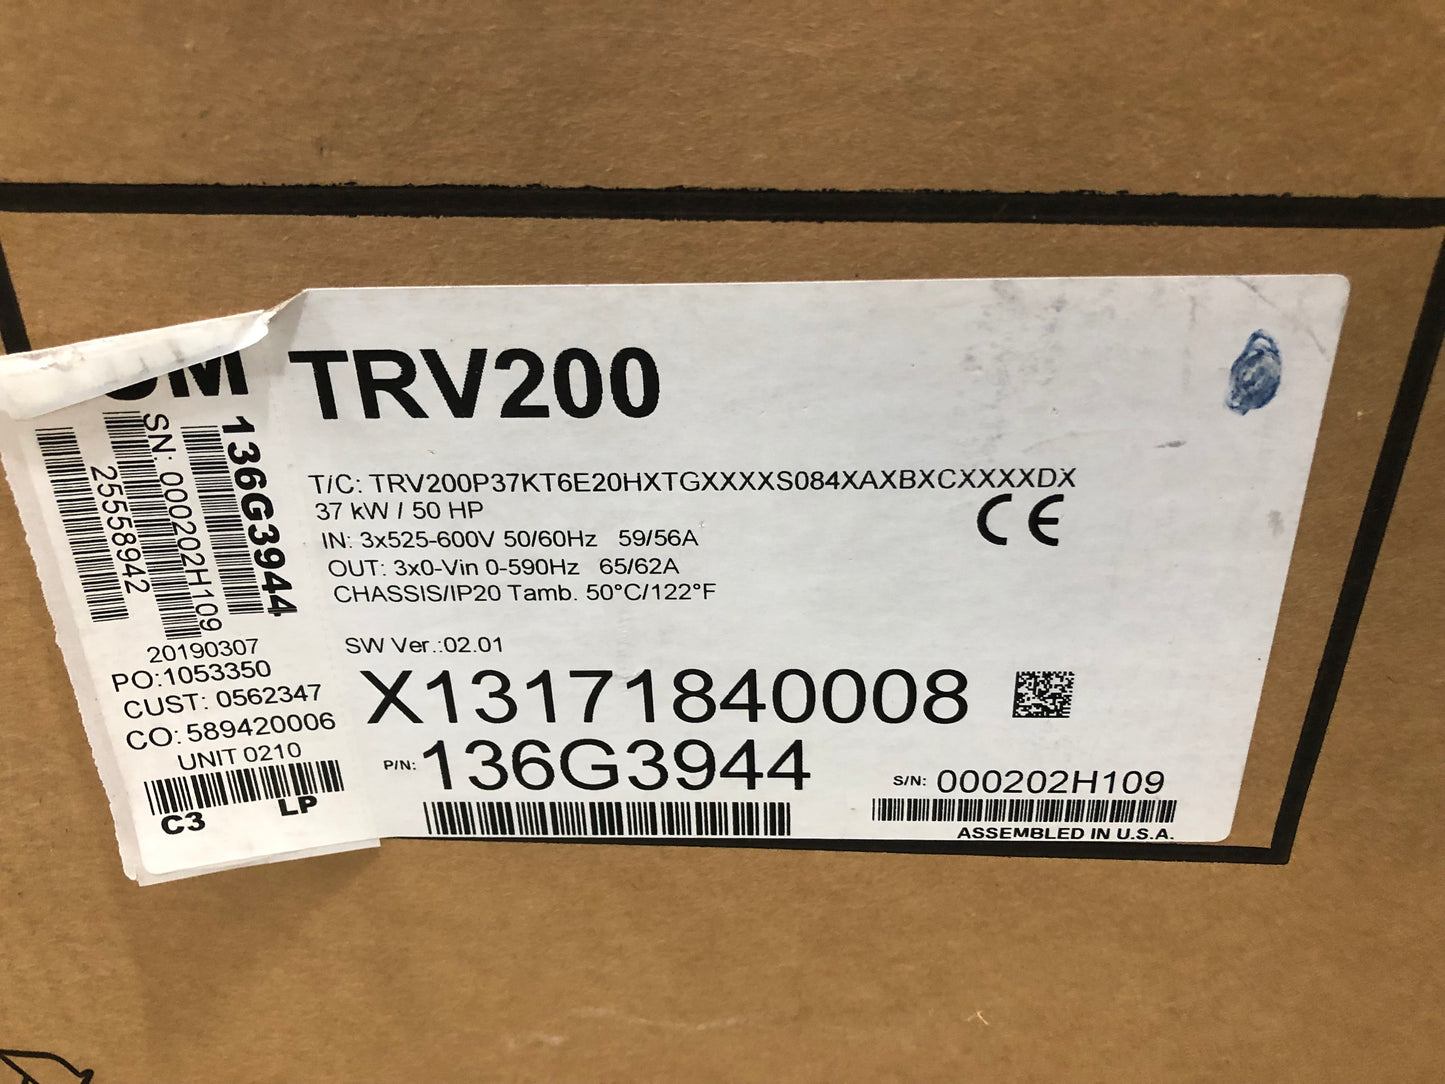 "TR200 SERIES" VARIABLE FREQUENCY DRIVE 525-600/50-60/3